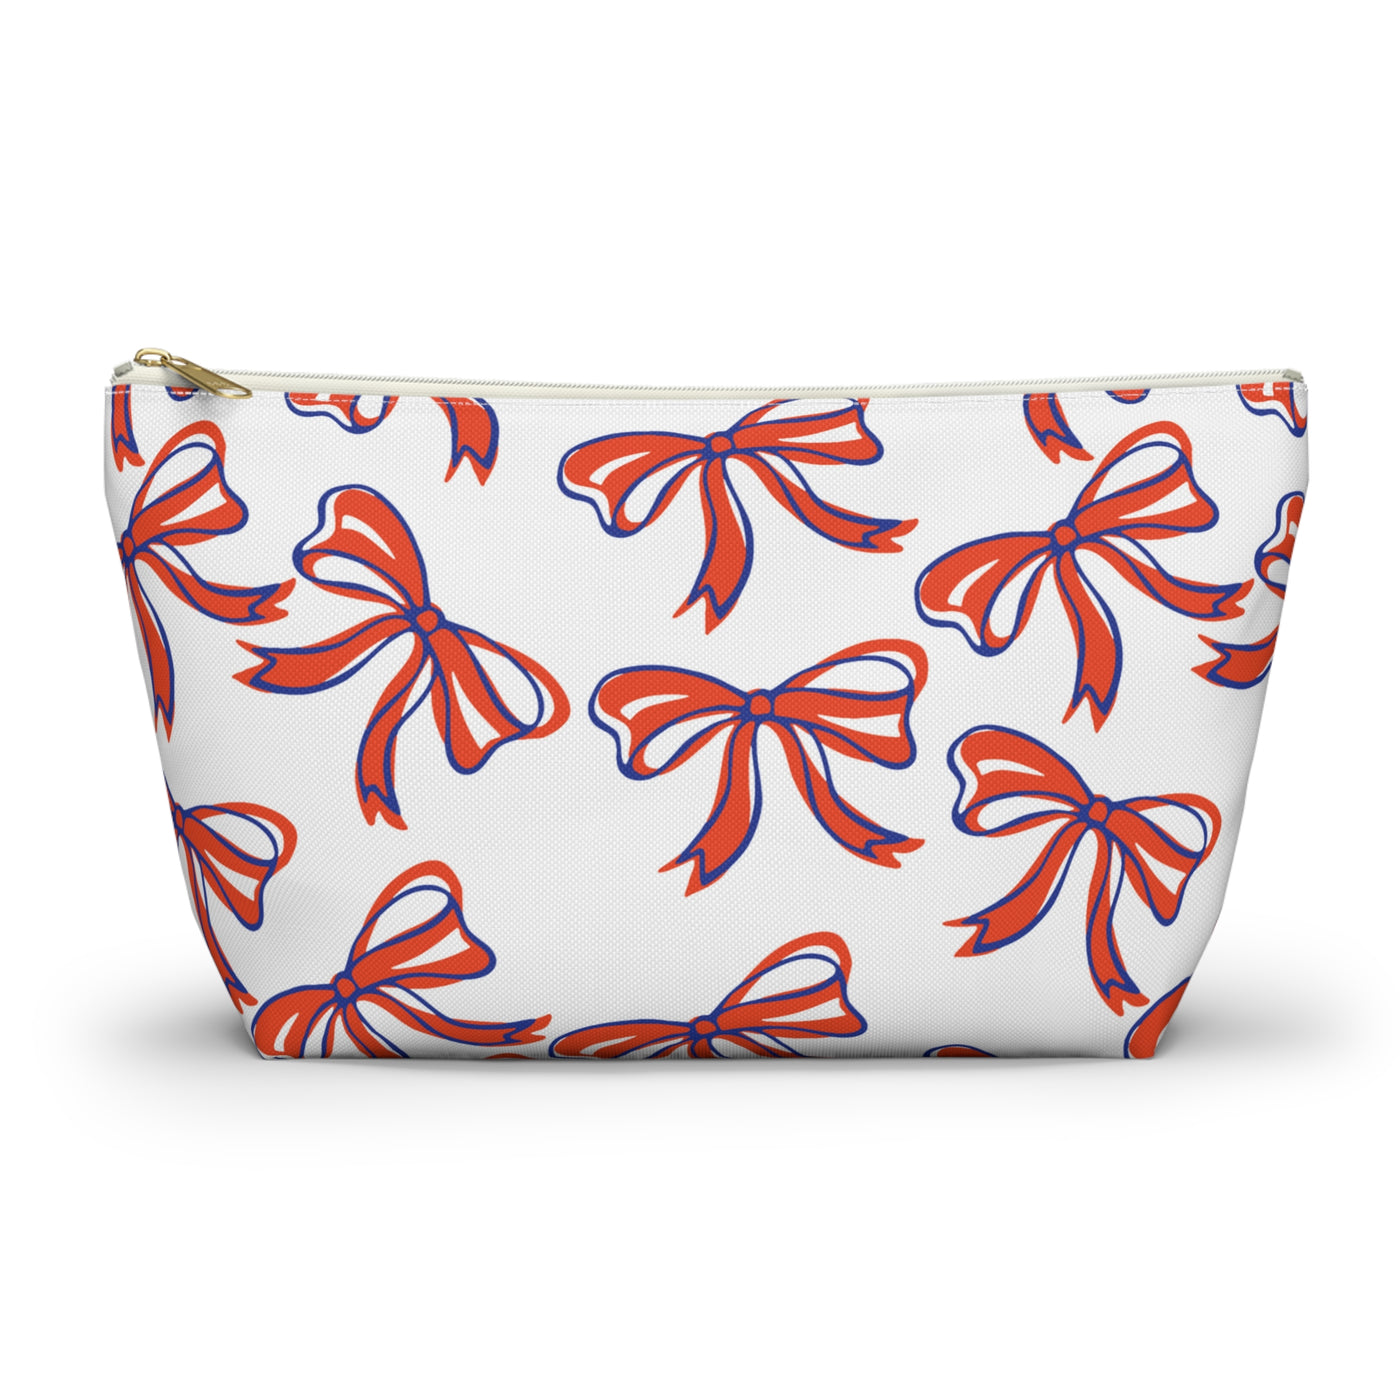 Trendy Bow Makeup Bag - Graduation Gift, Bed Party Gift, Acceptance Gift, College Gift, Florida Gators, UF, Blue and Orange